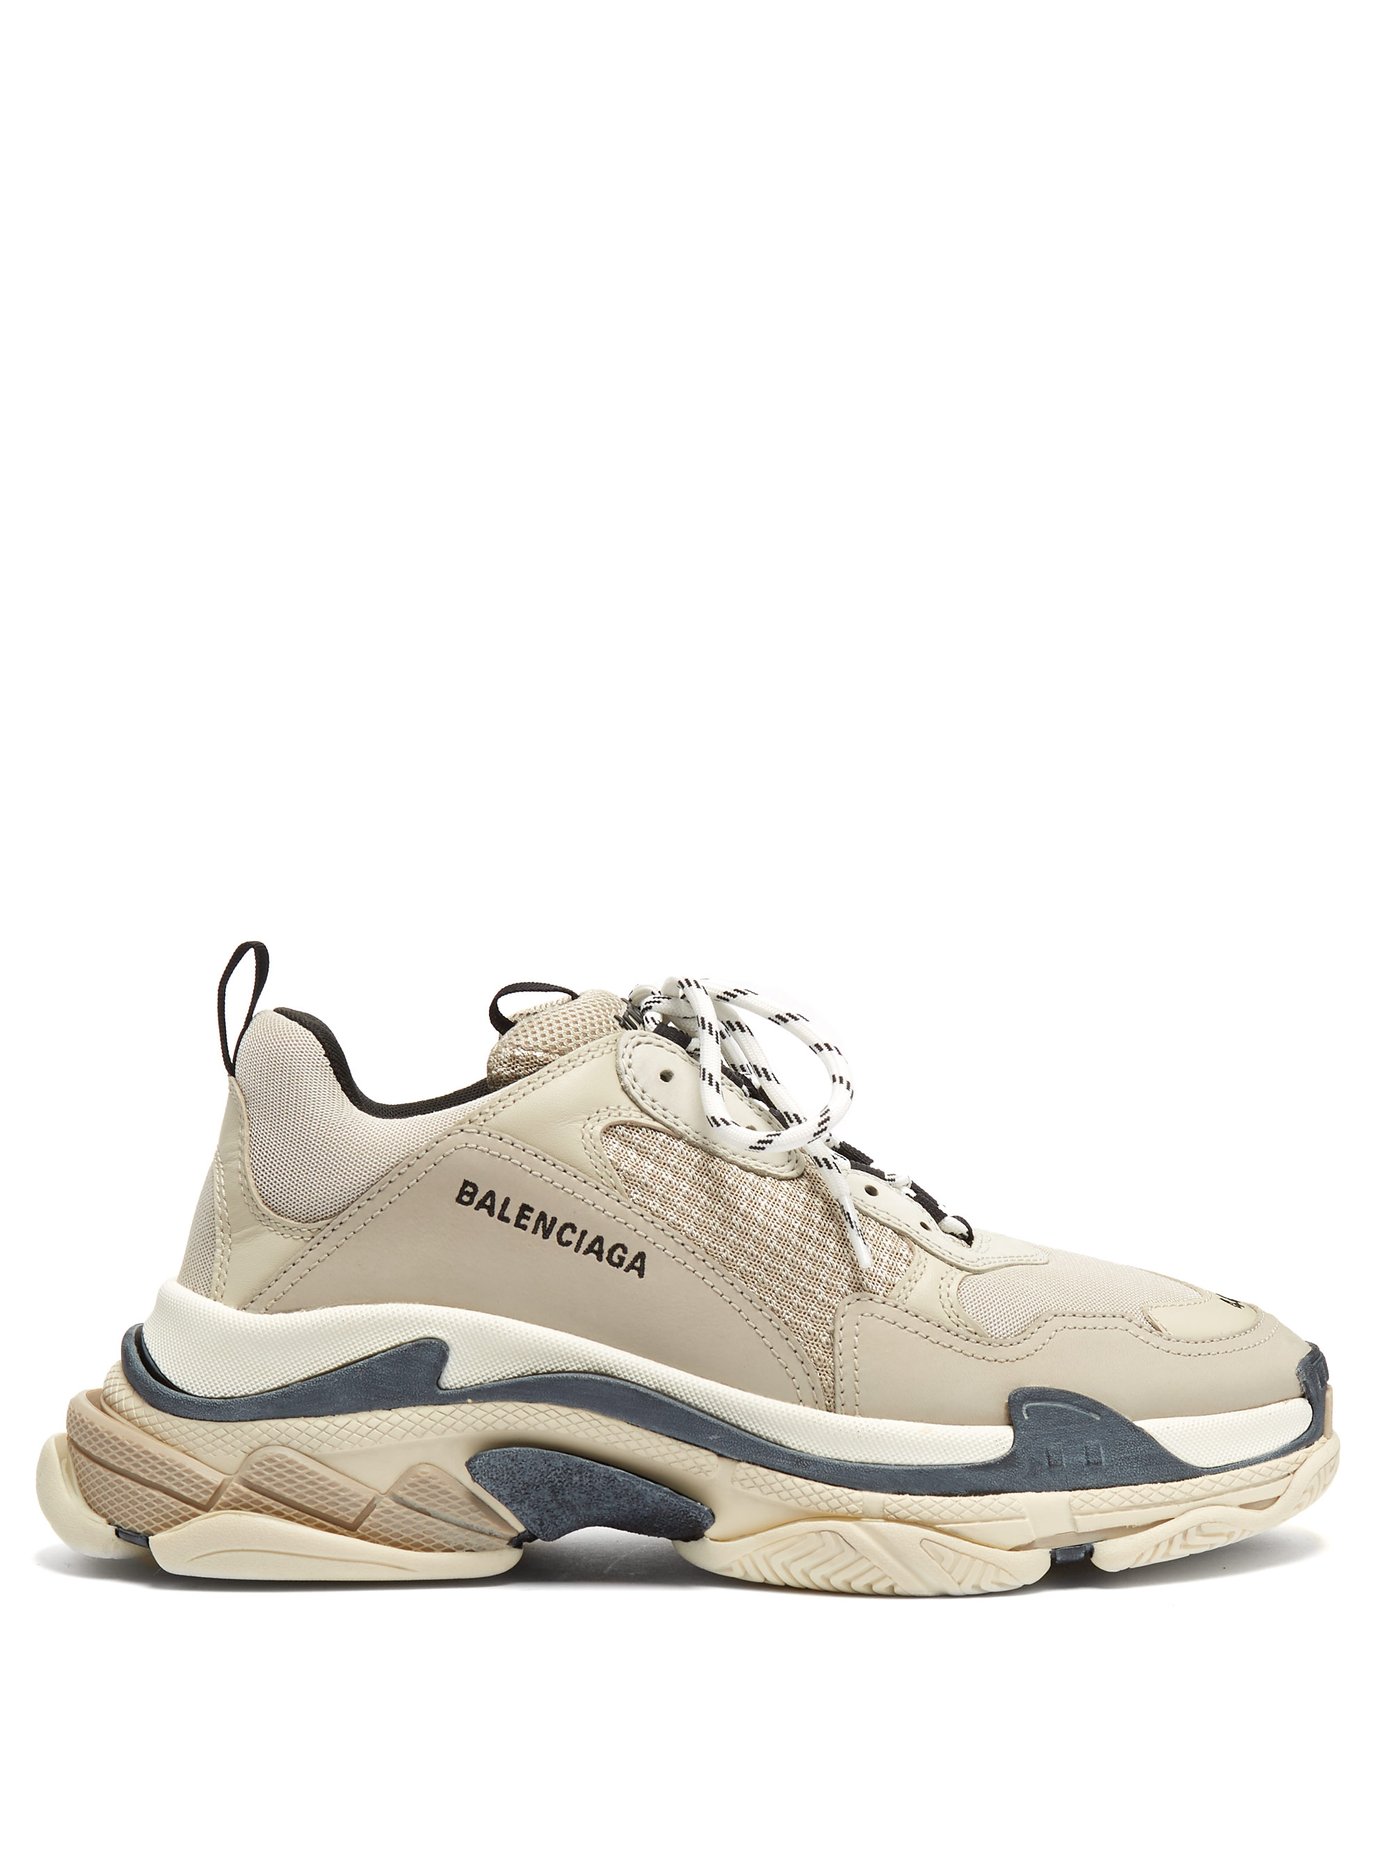 Balenciaga Triple S Mesh and Leather Sneakers Mr Porter